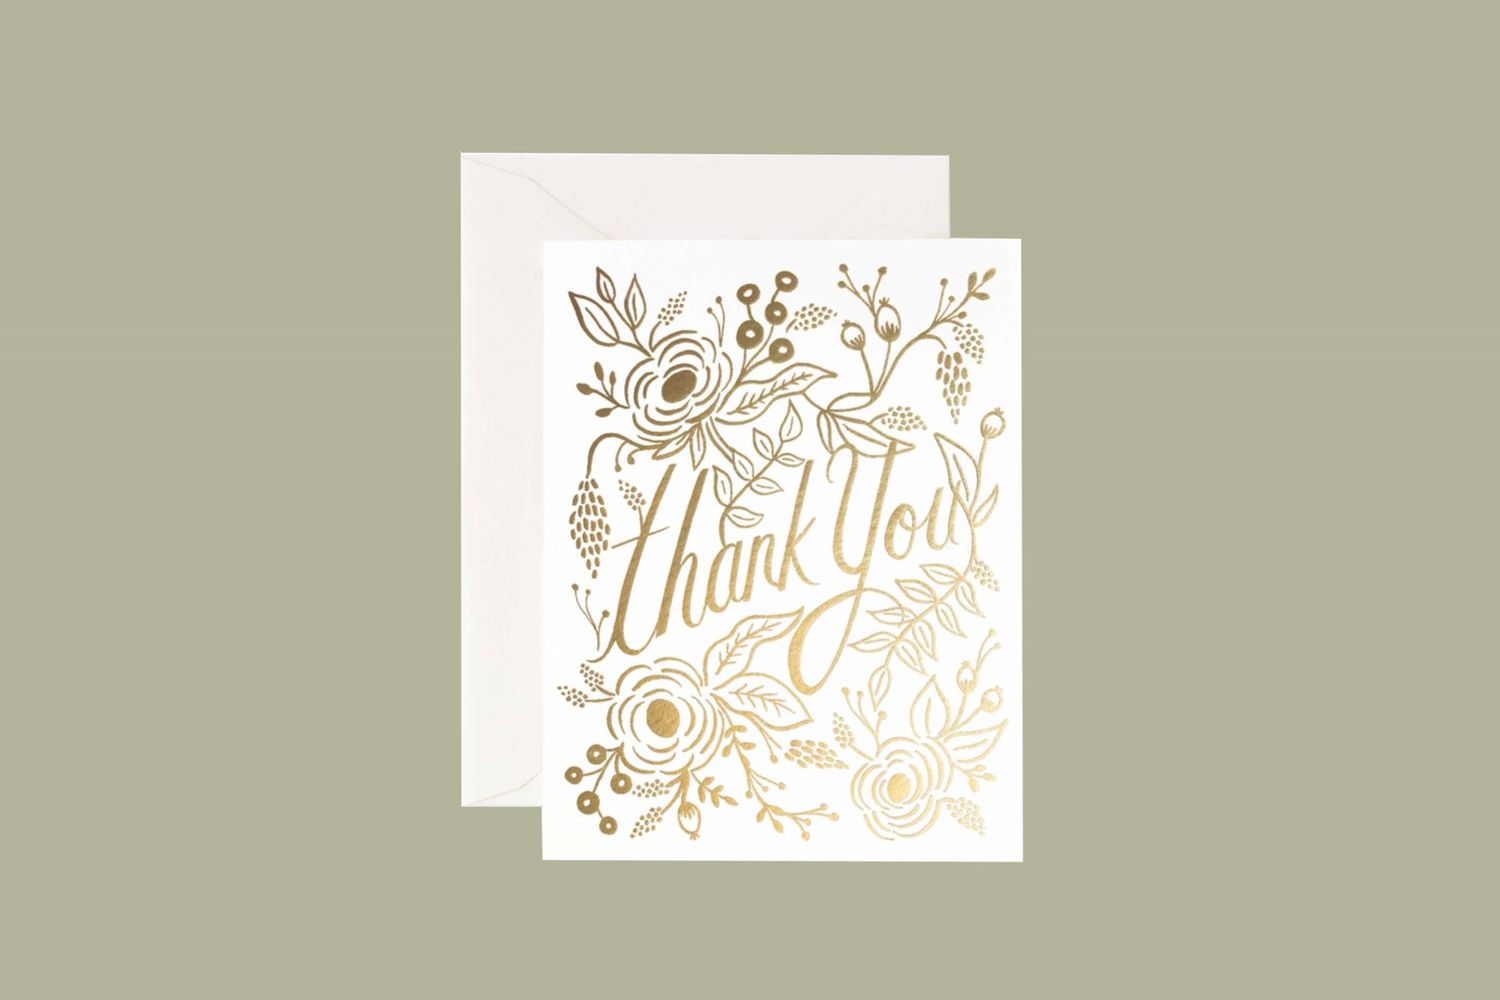 50 x Wedding Thank You Cards Handmade & Personalised 